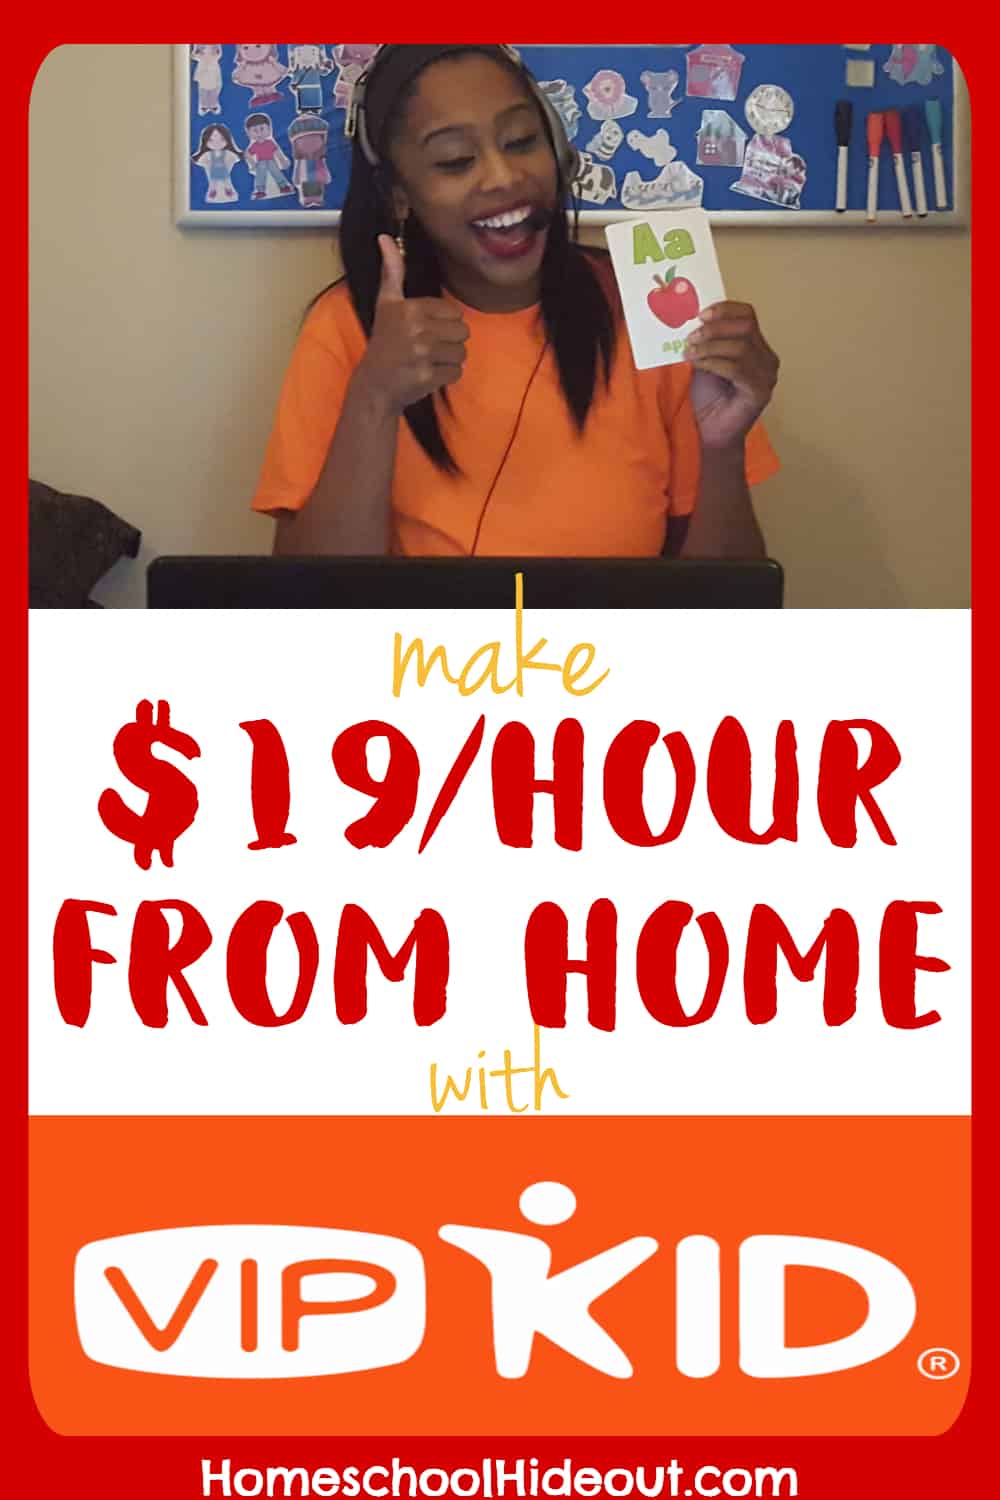 It's never been easier to make part-time money at home! With VIPKID, teachers average $19/hour from the comfort of their home!